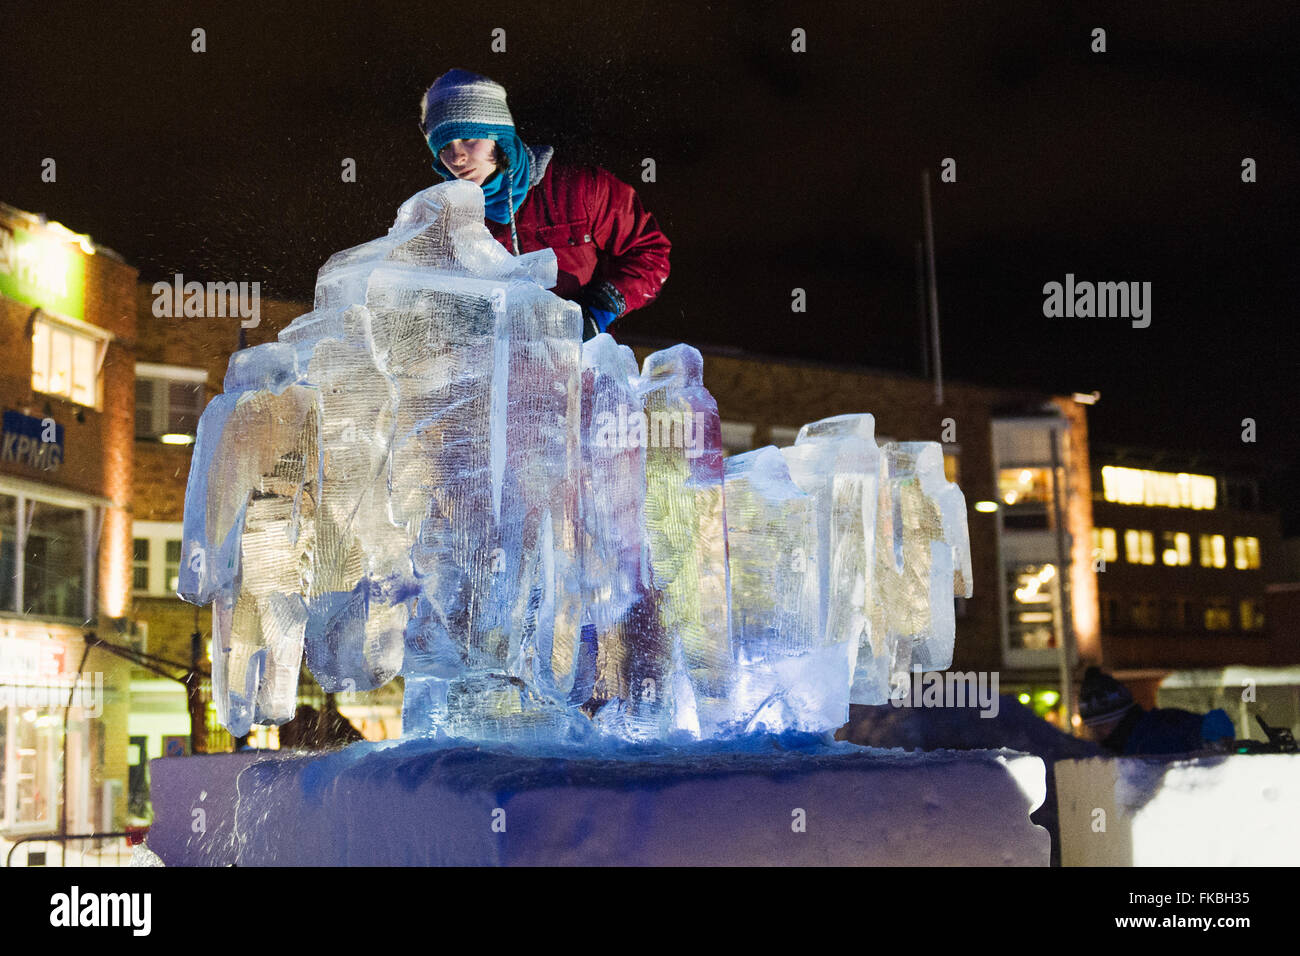 Ice carving sculpture in Alta, Norway. The carvings were created for the launch of the Finnmarksløpet dog race. Stock Photo